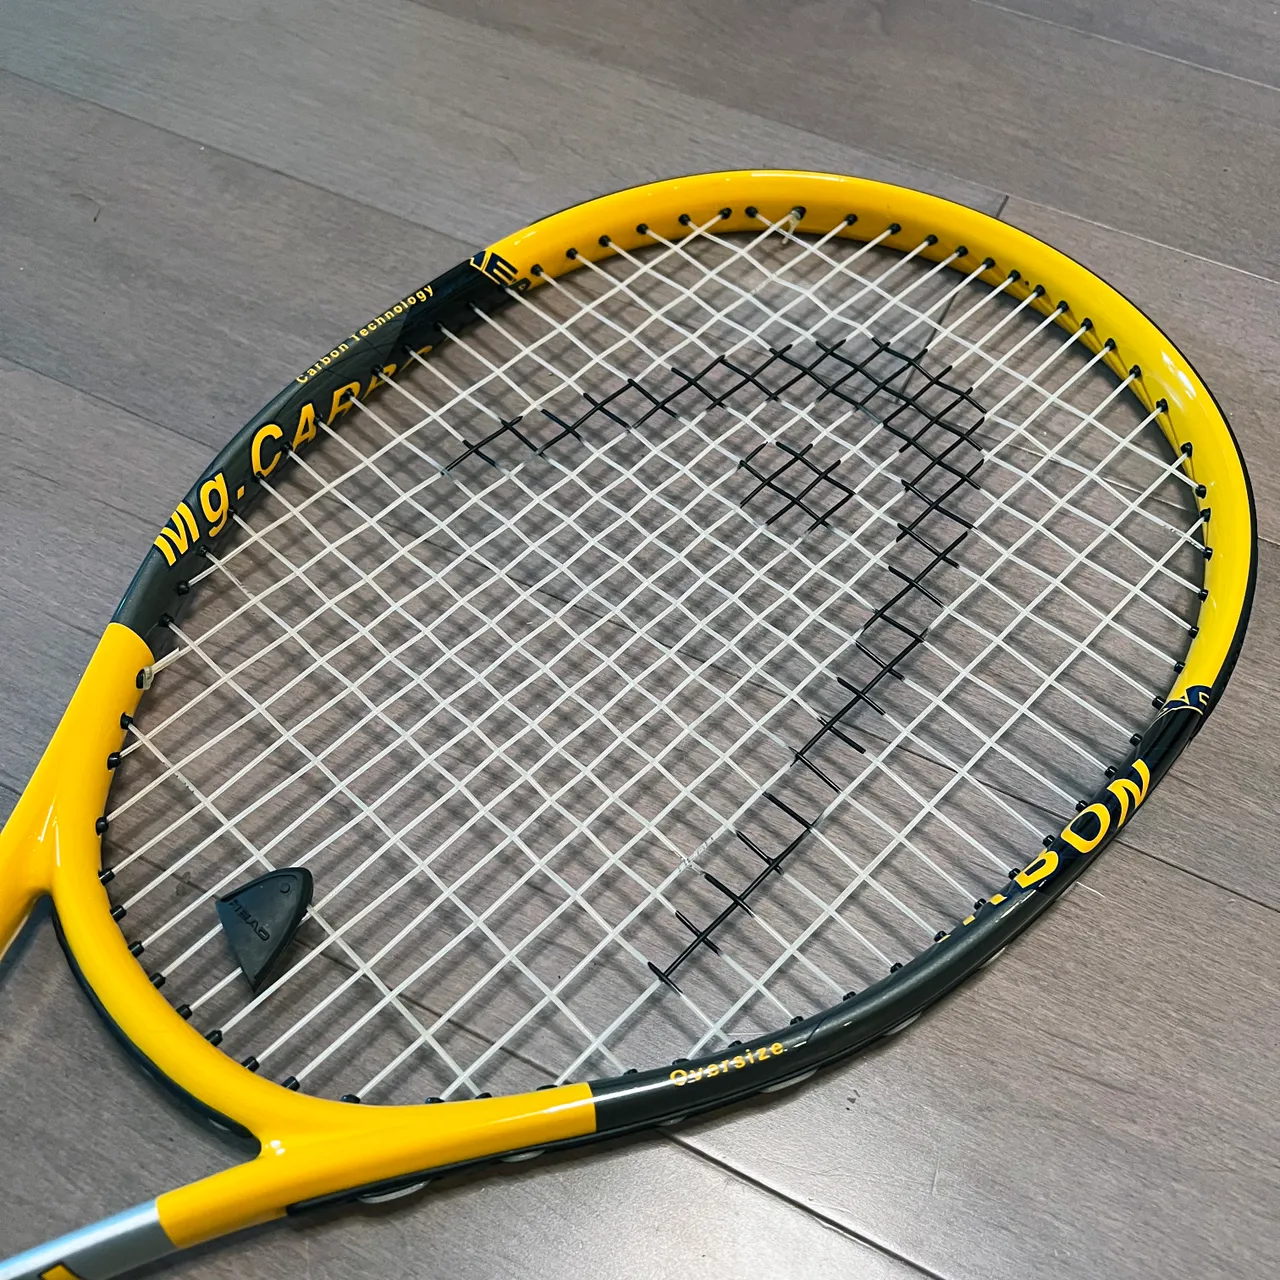 New Tennis Racket w/ Cover photo 3